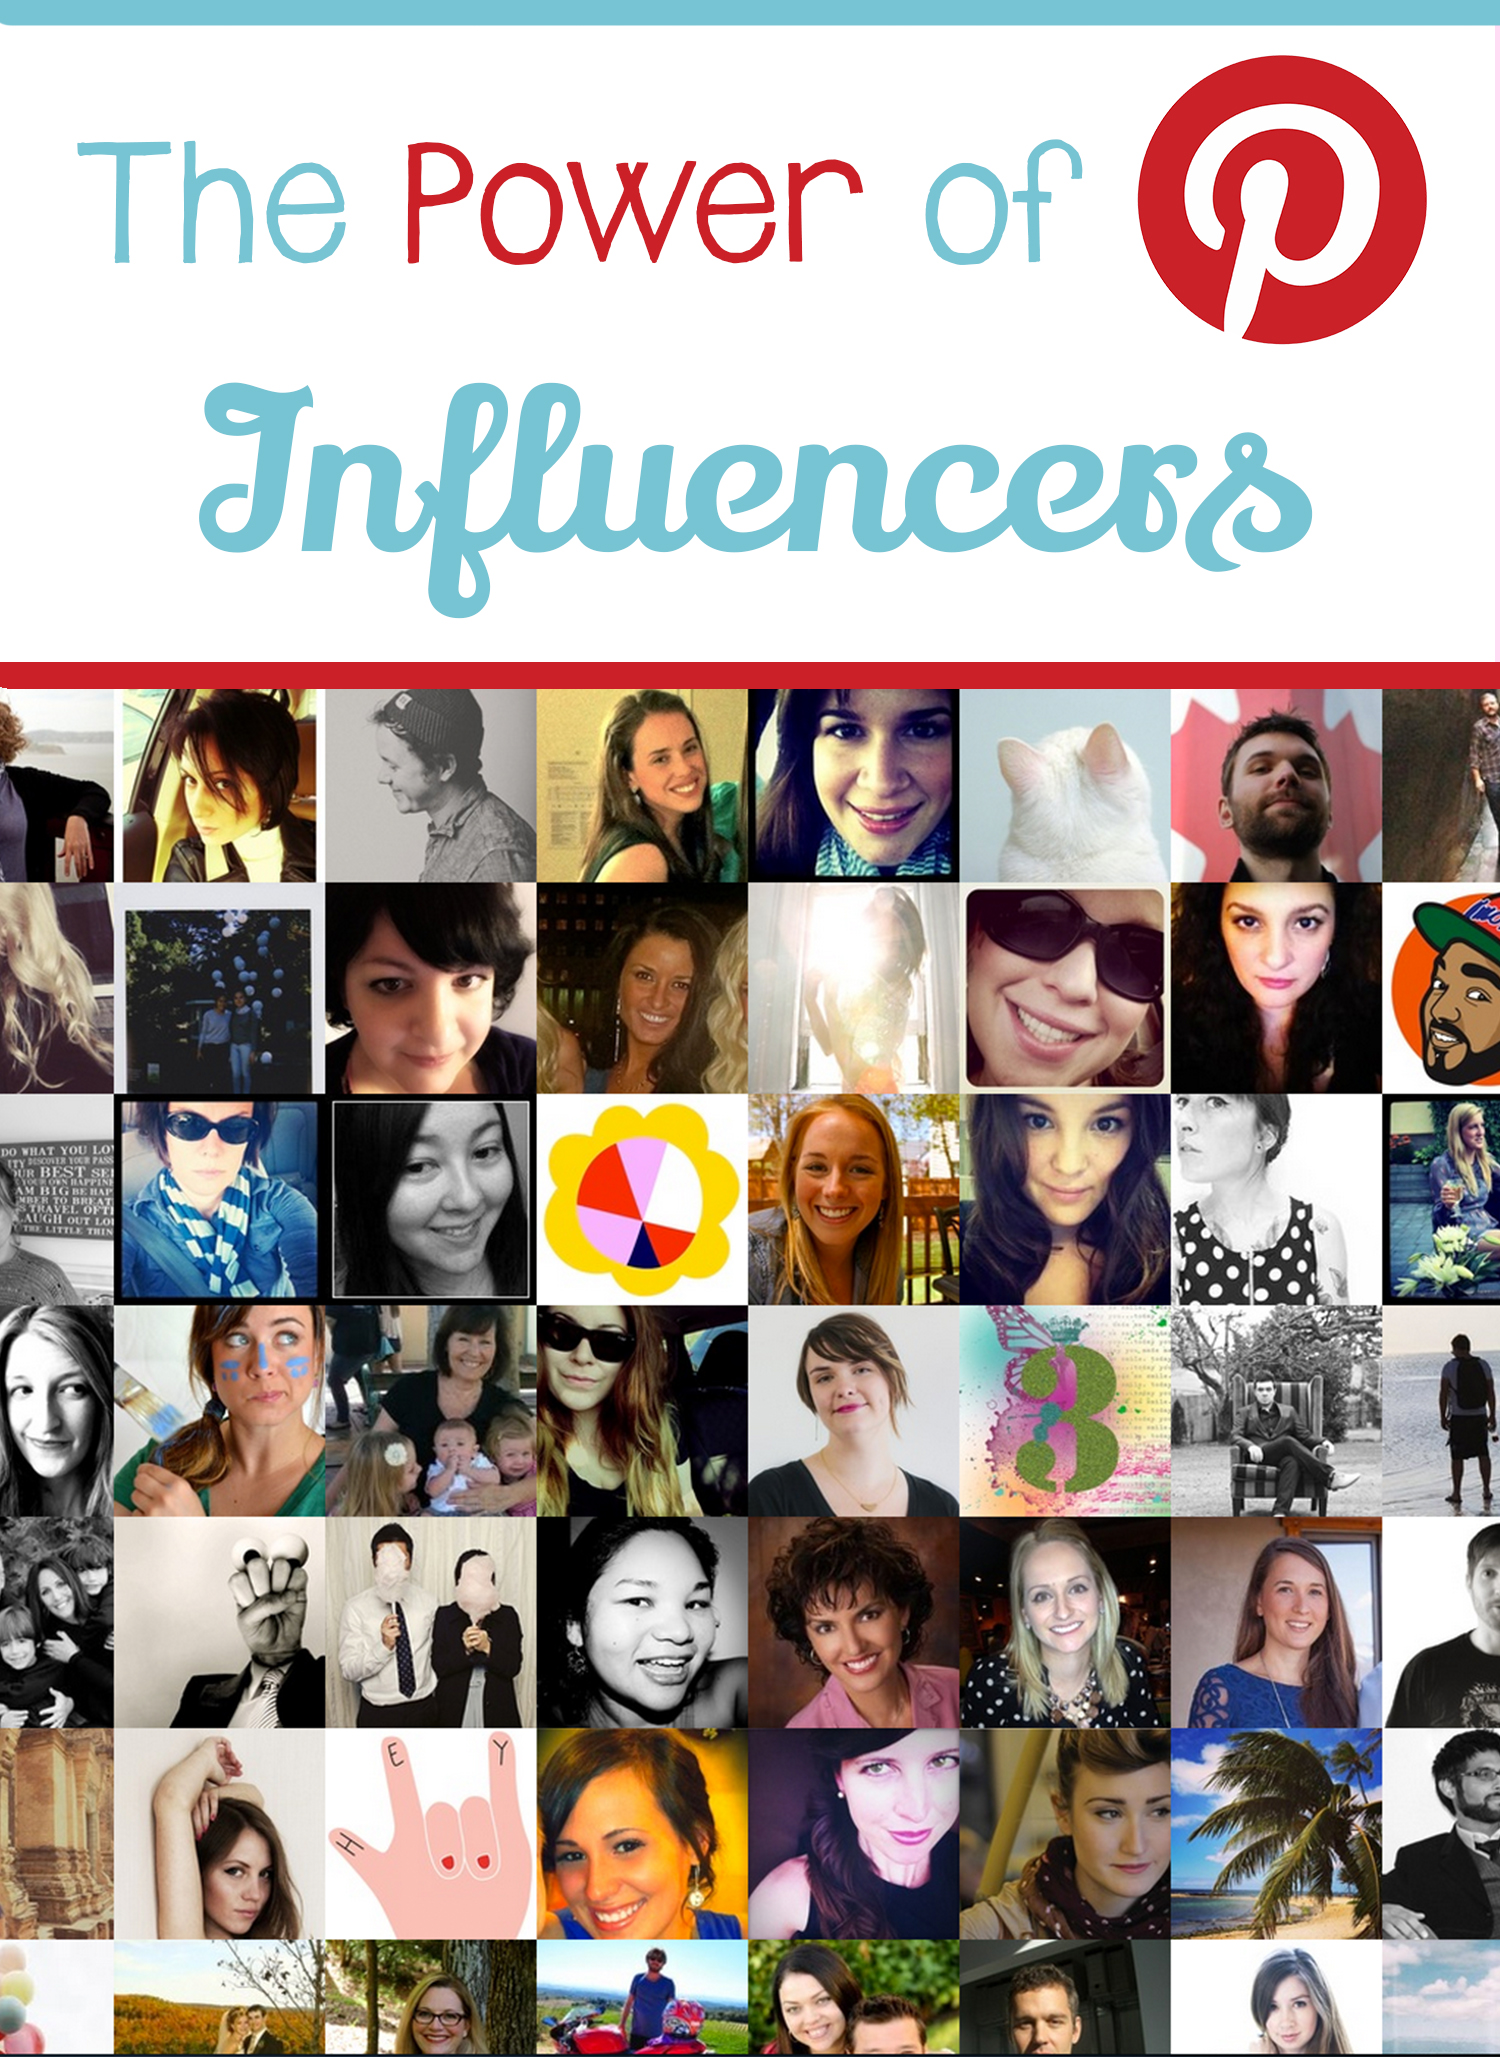 Pin on influencer inspiration.